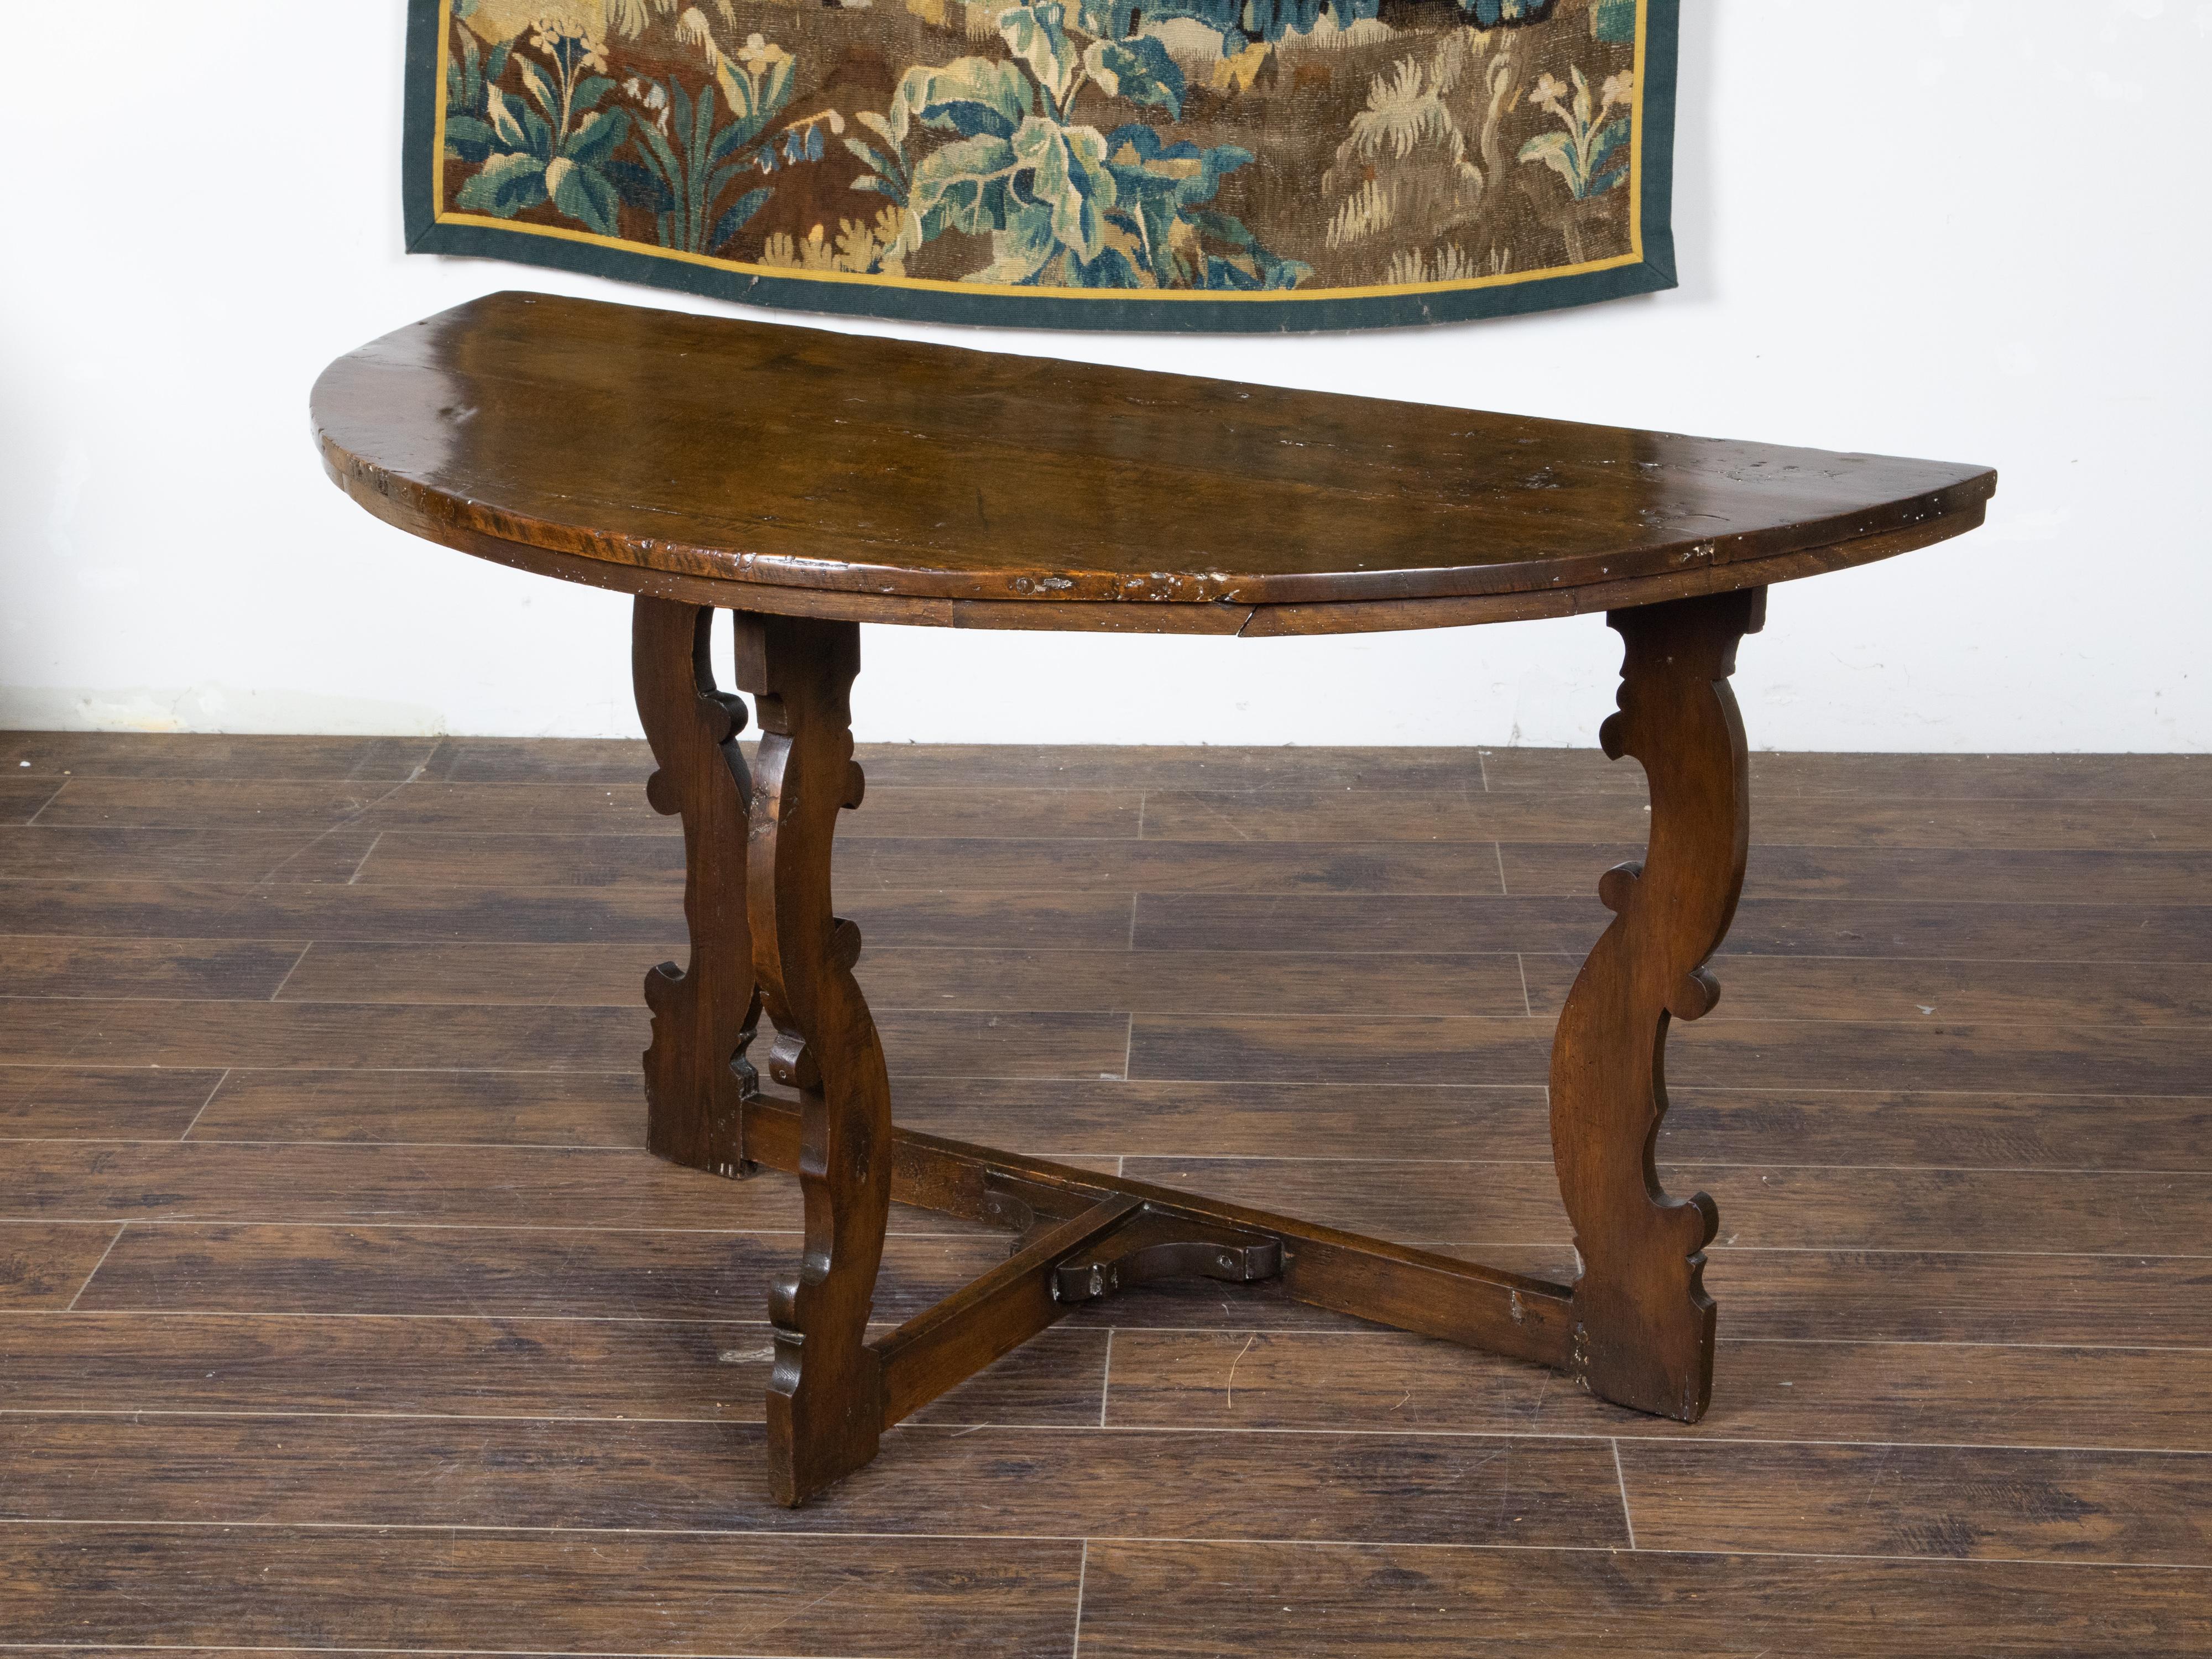 Large Italian Baroque Style 18th Century Walnut Demilune Table with Carved Legs For Sale 5